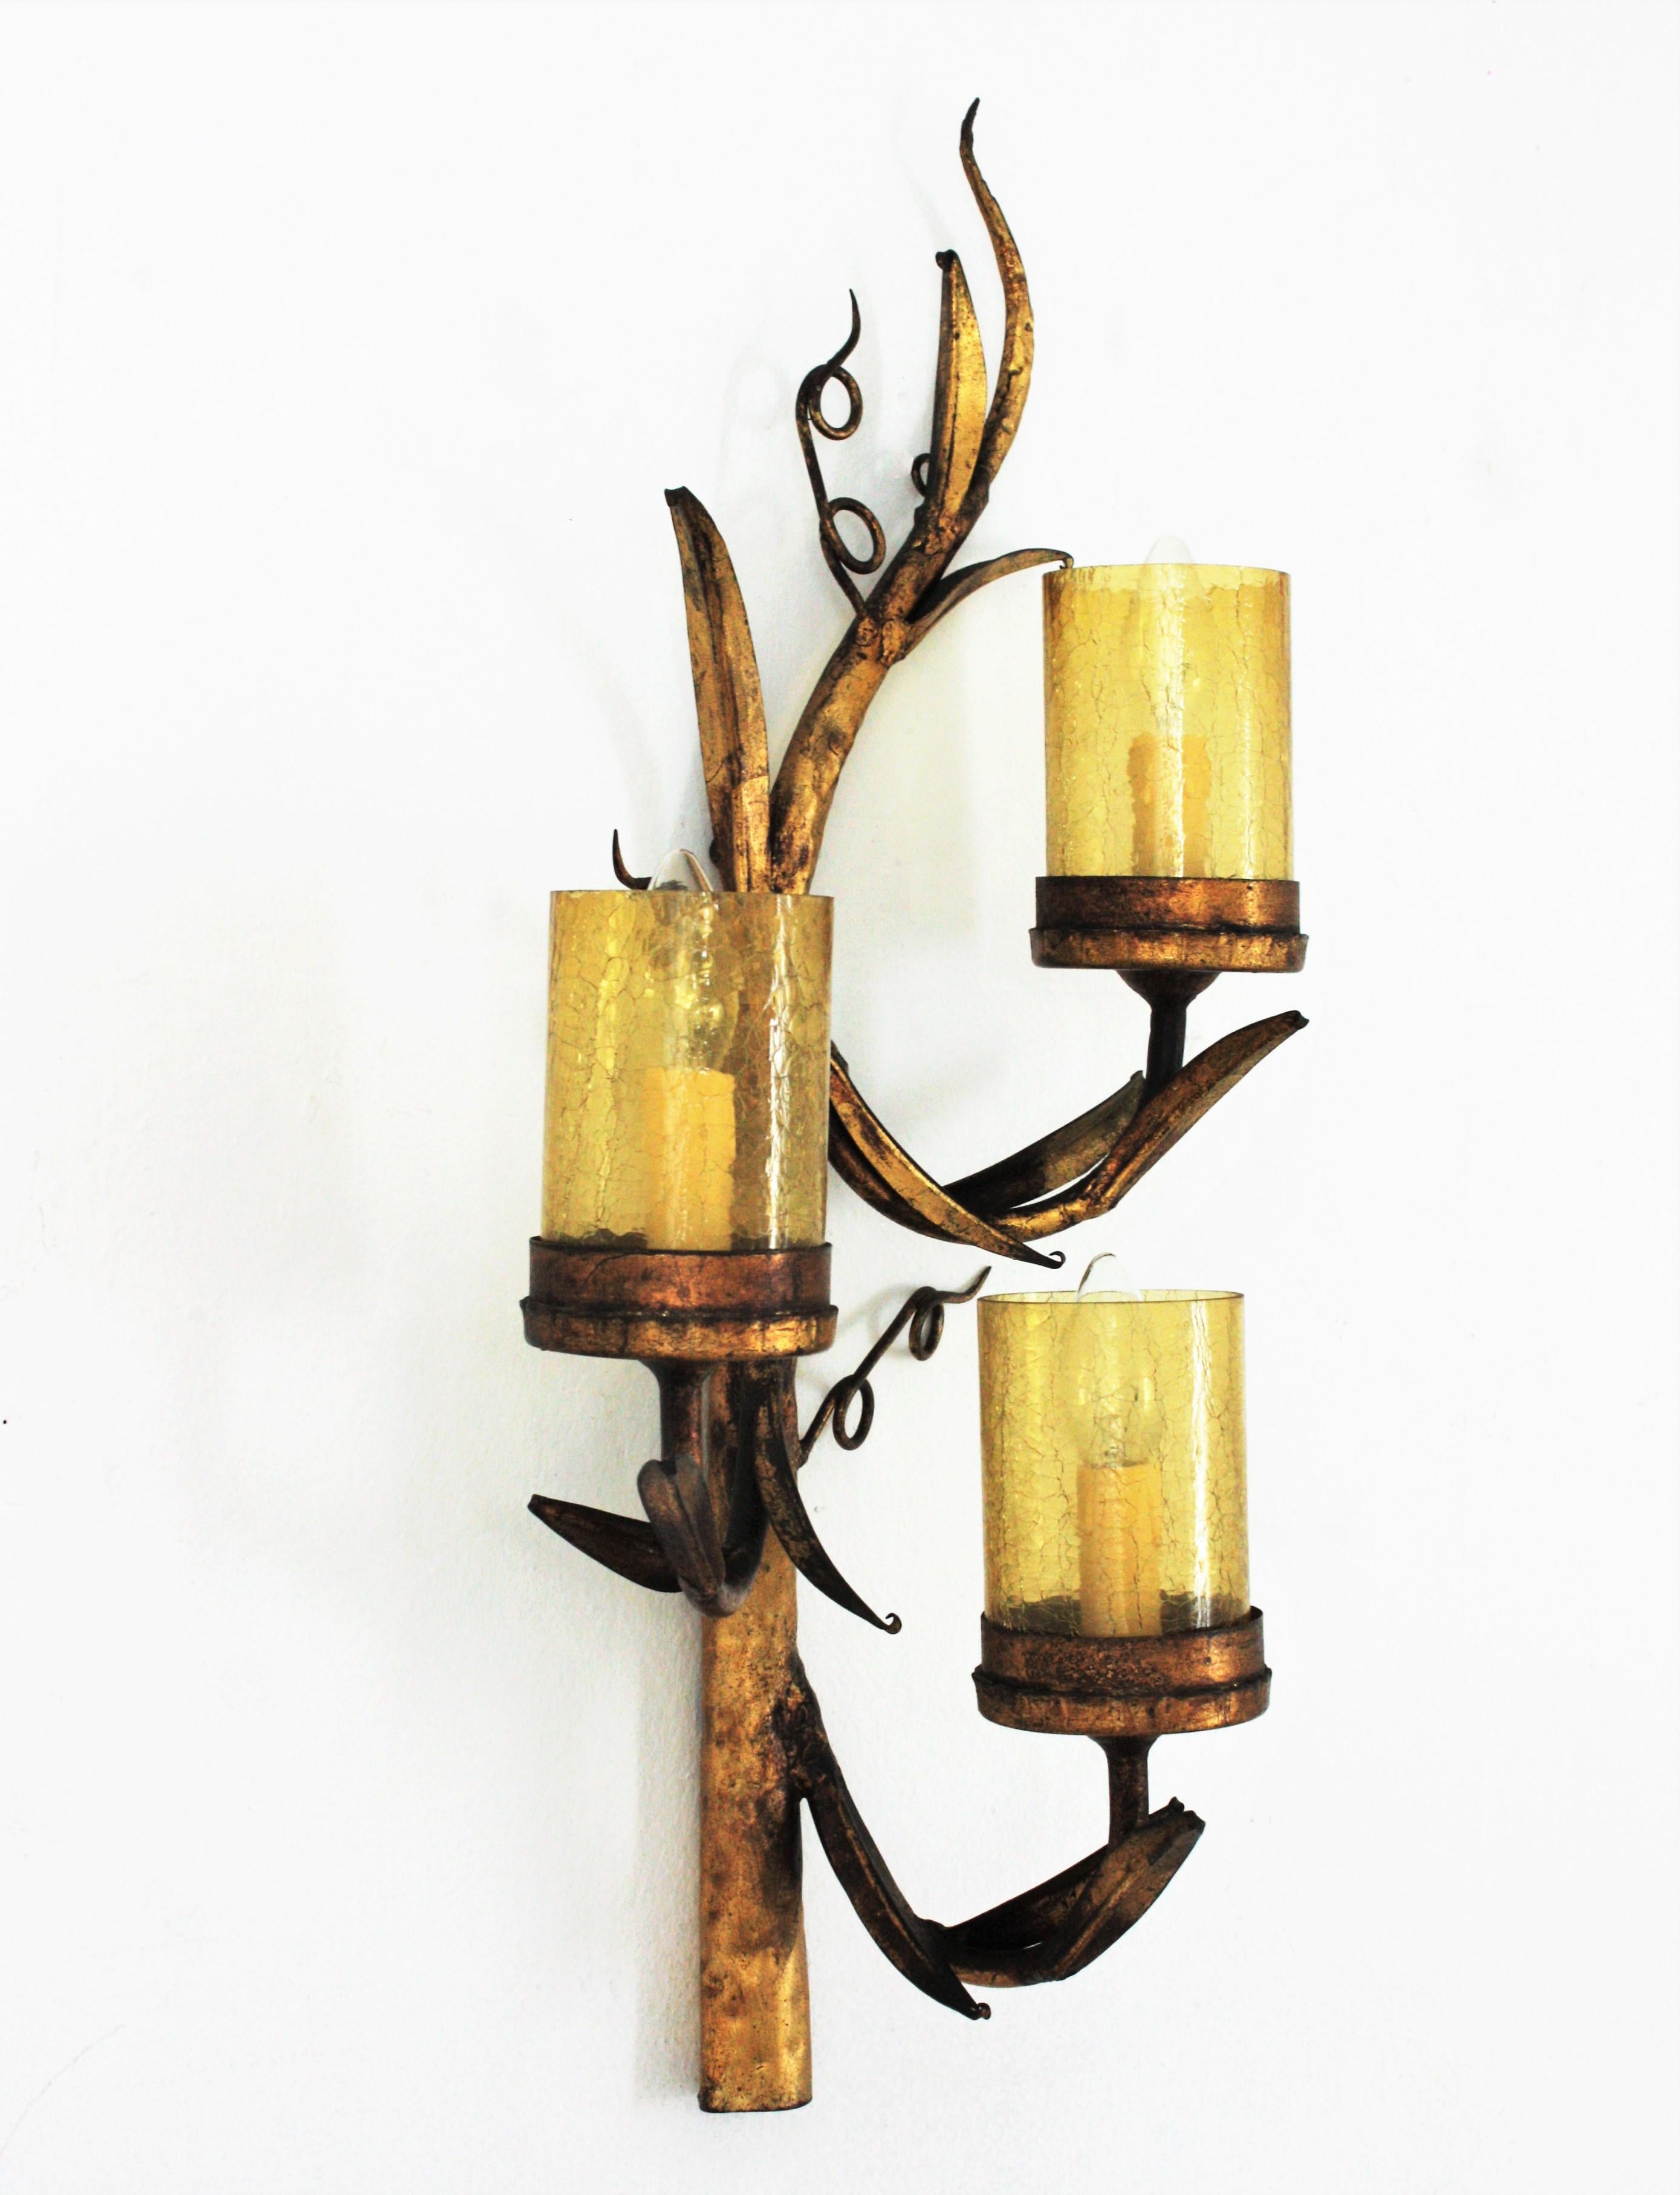 20th Century Spanish Branch Wall Sconce in Gilt Iron and Amber Cracked Glass, 1950s For Sale